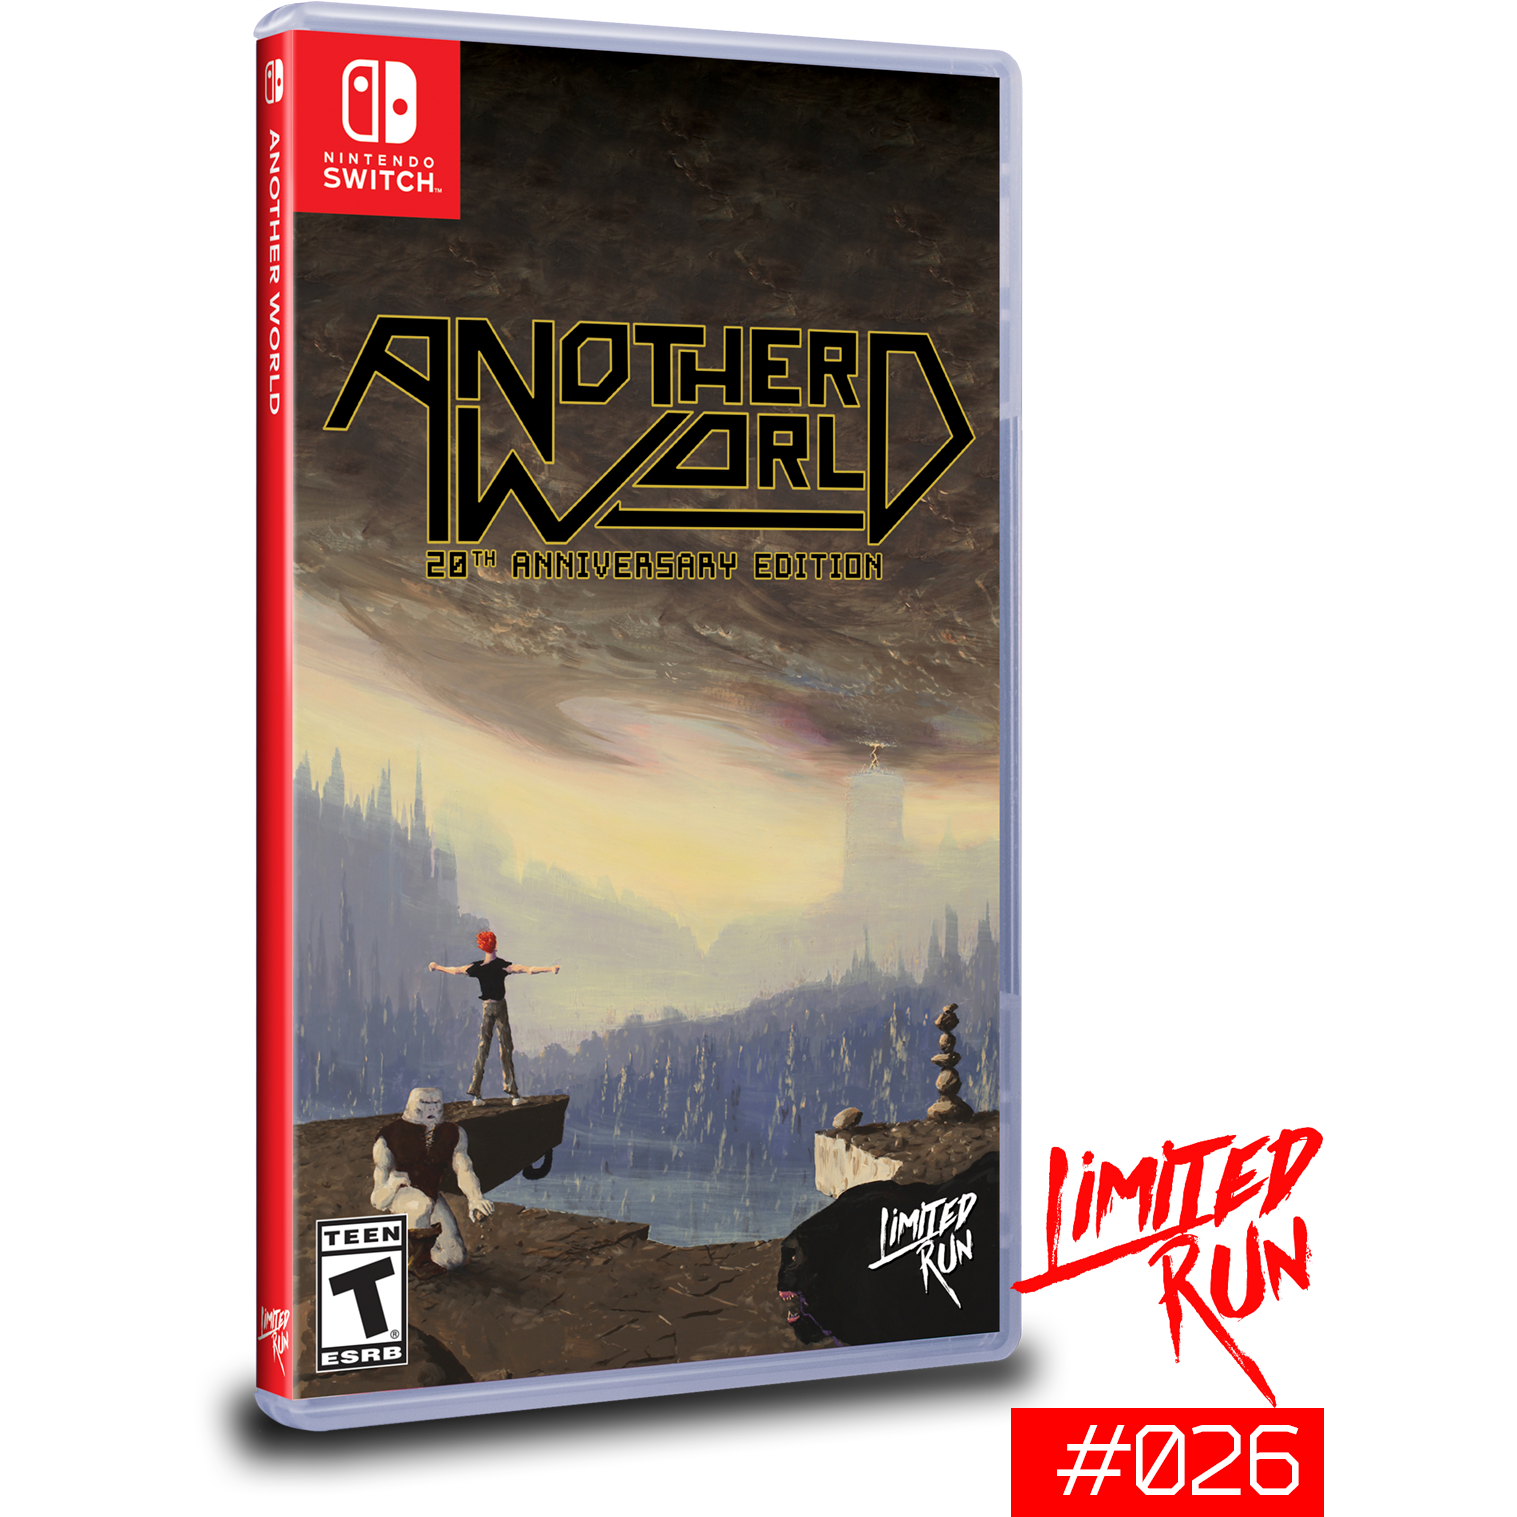 Switch - Another World (Limited Run Game #026) (In Case)